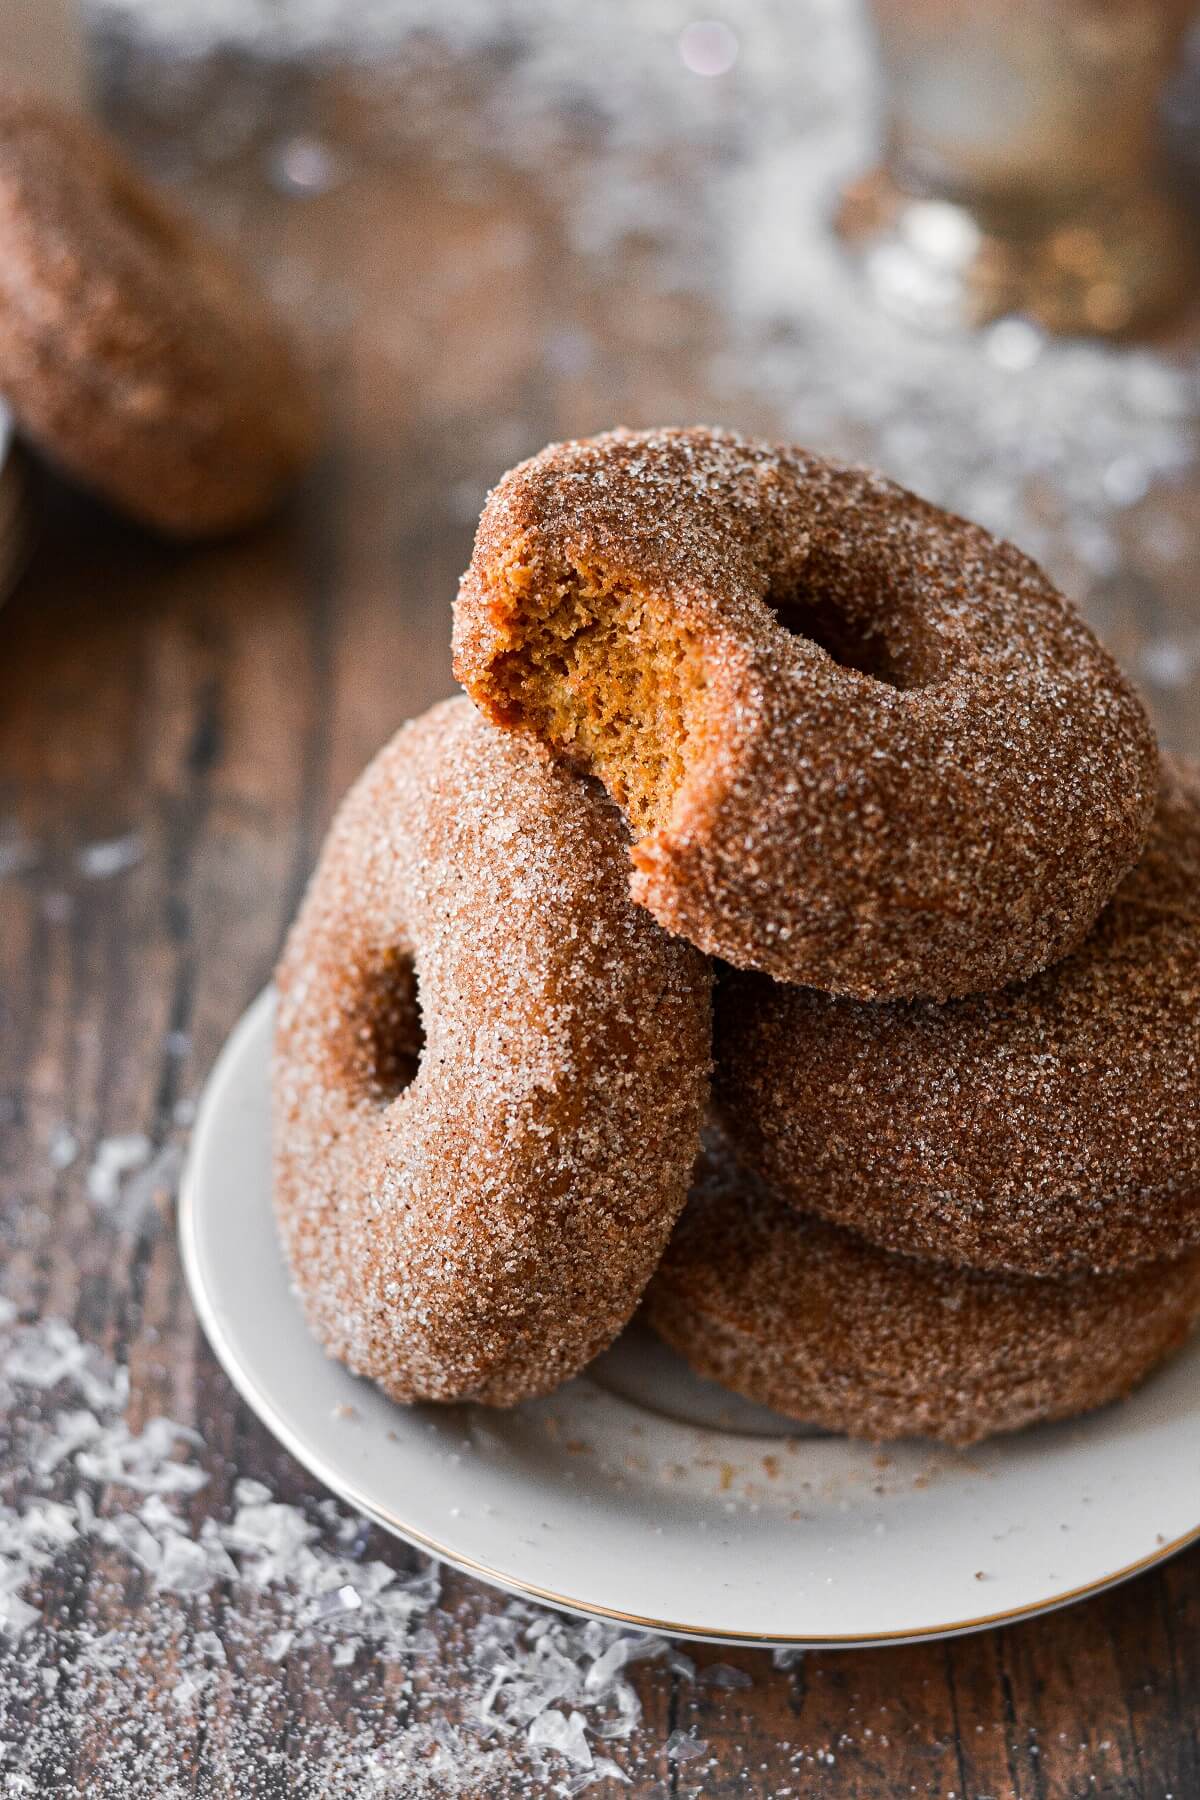 A stack of baked gingerbread doughnuts, one with a bite taken out of it.